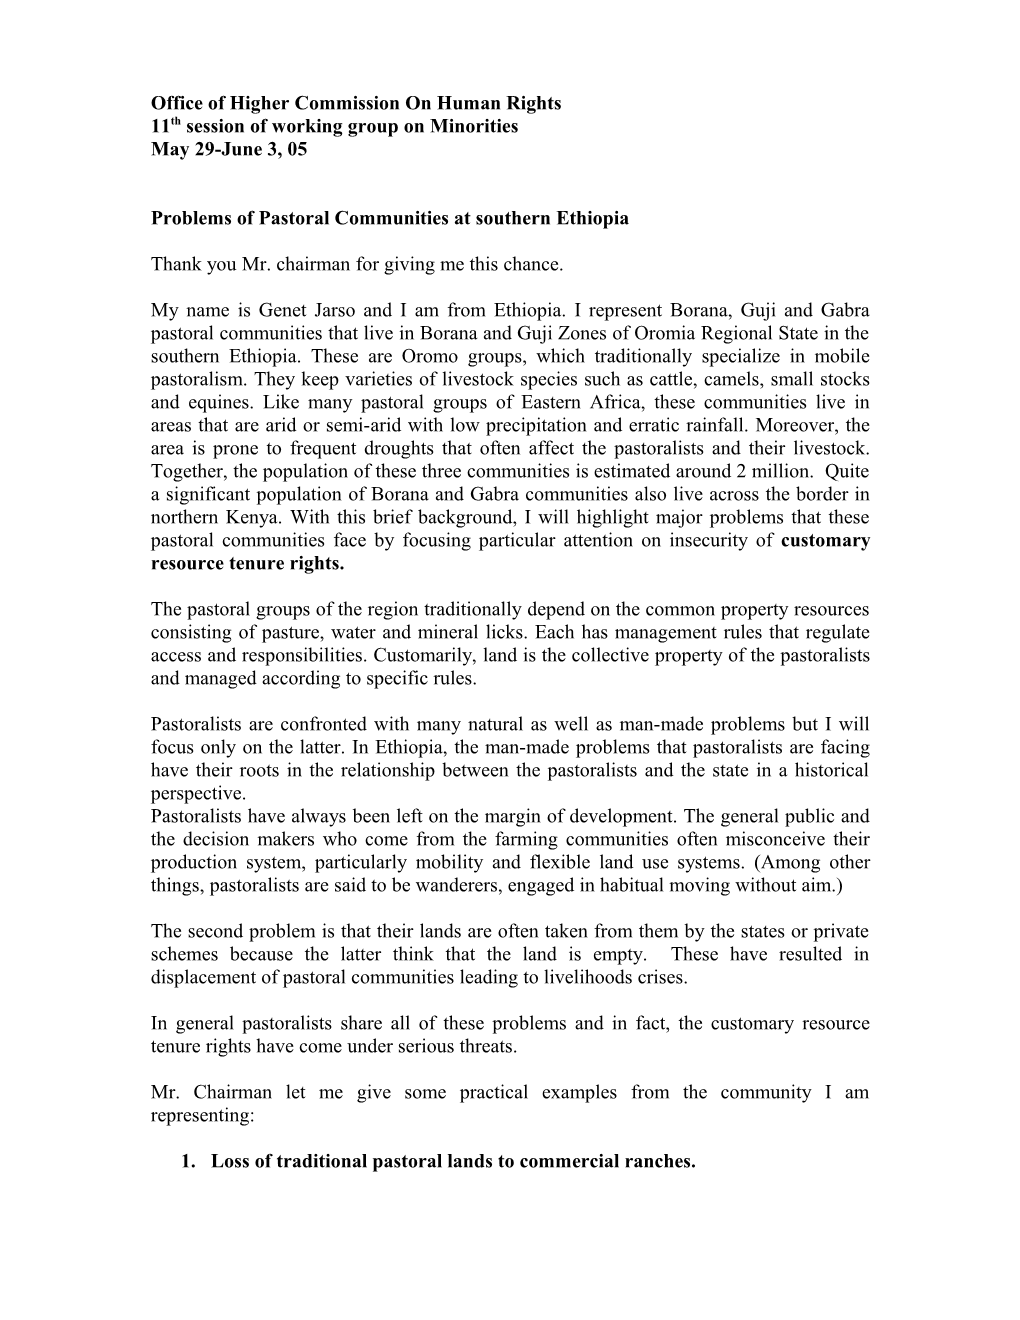 Statement on Problems of Pastoral Communities in Southern Ethiopia